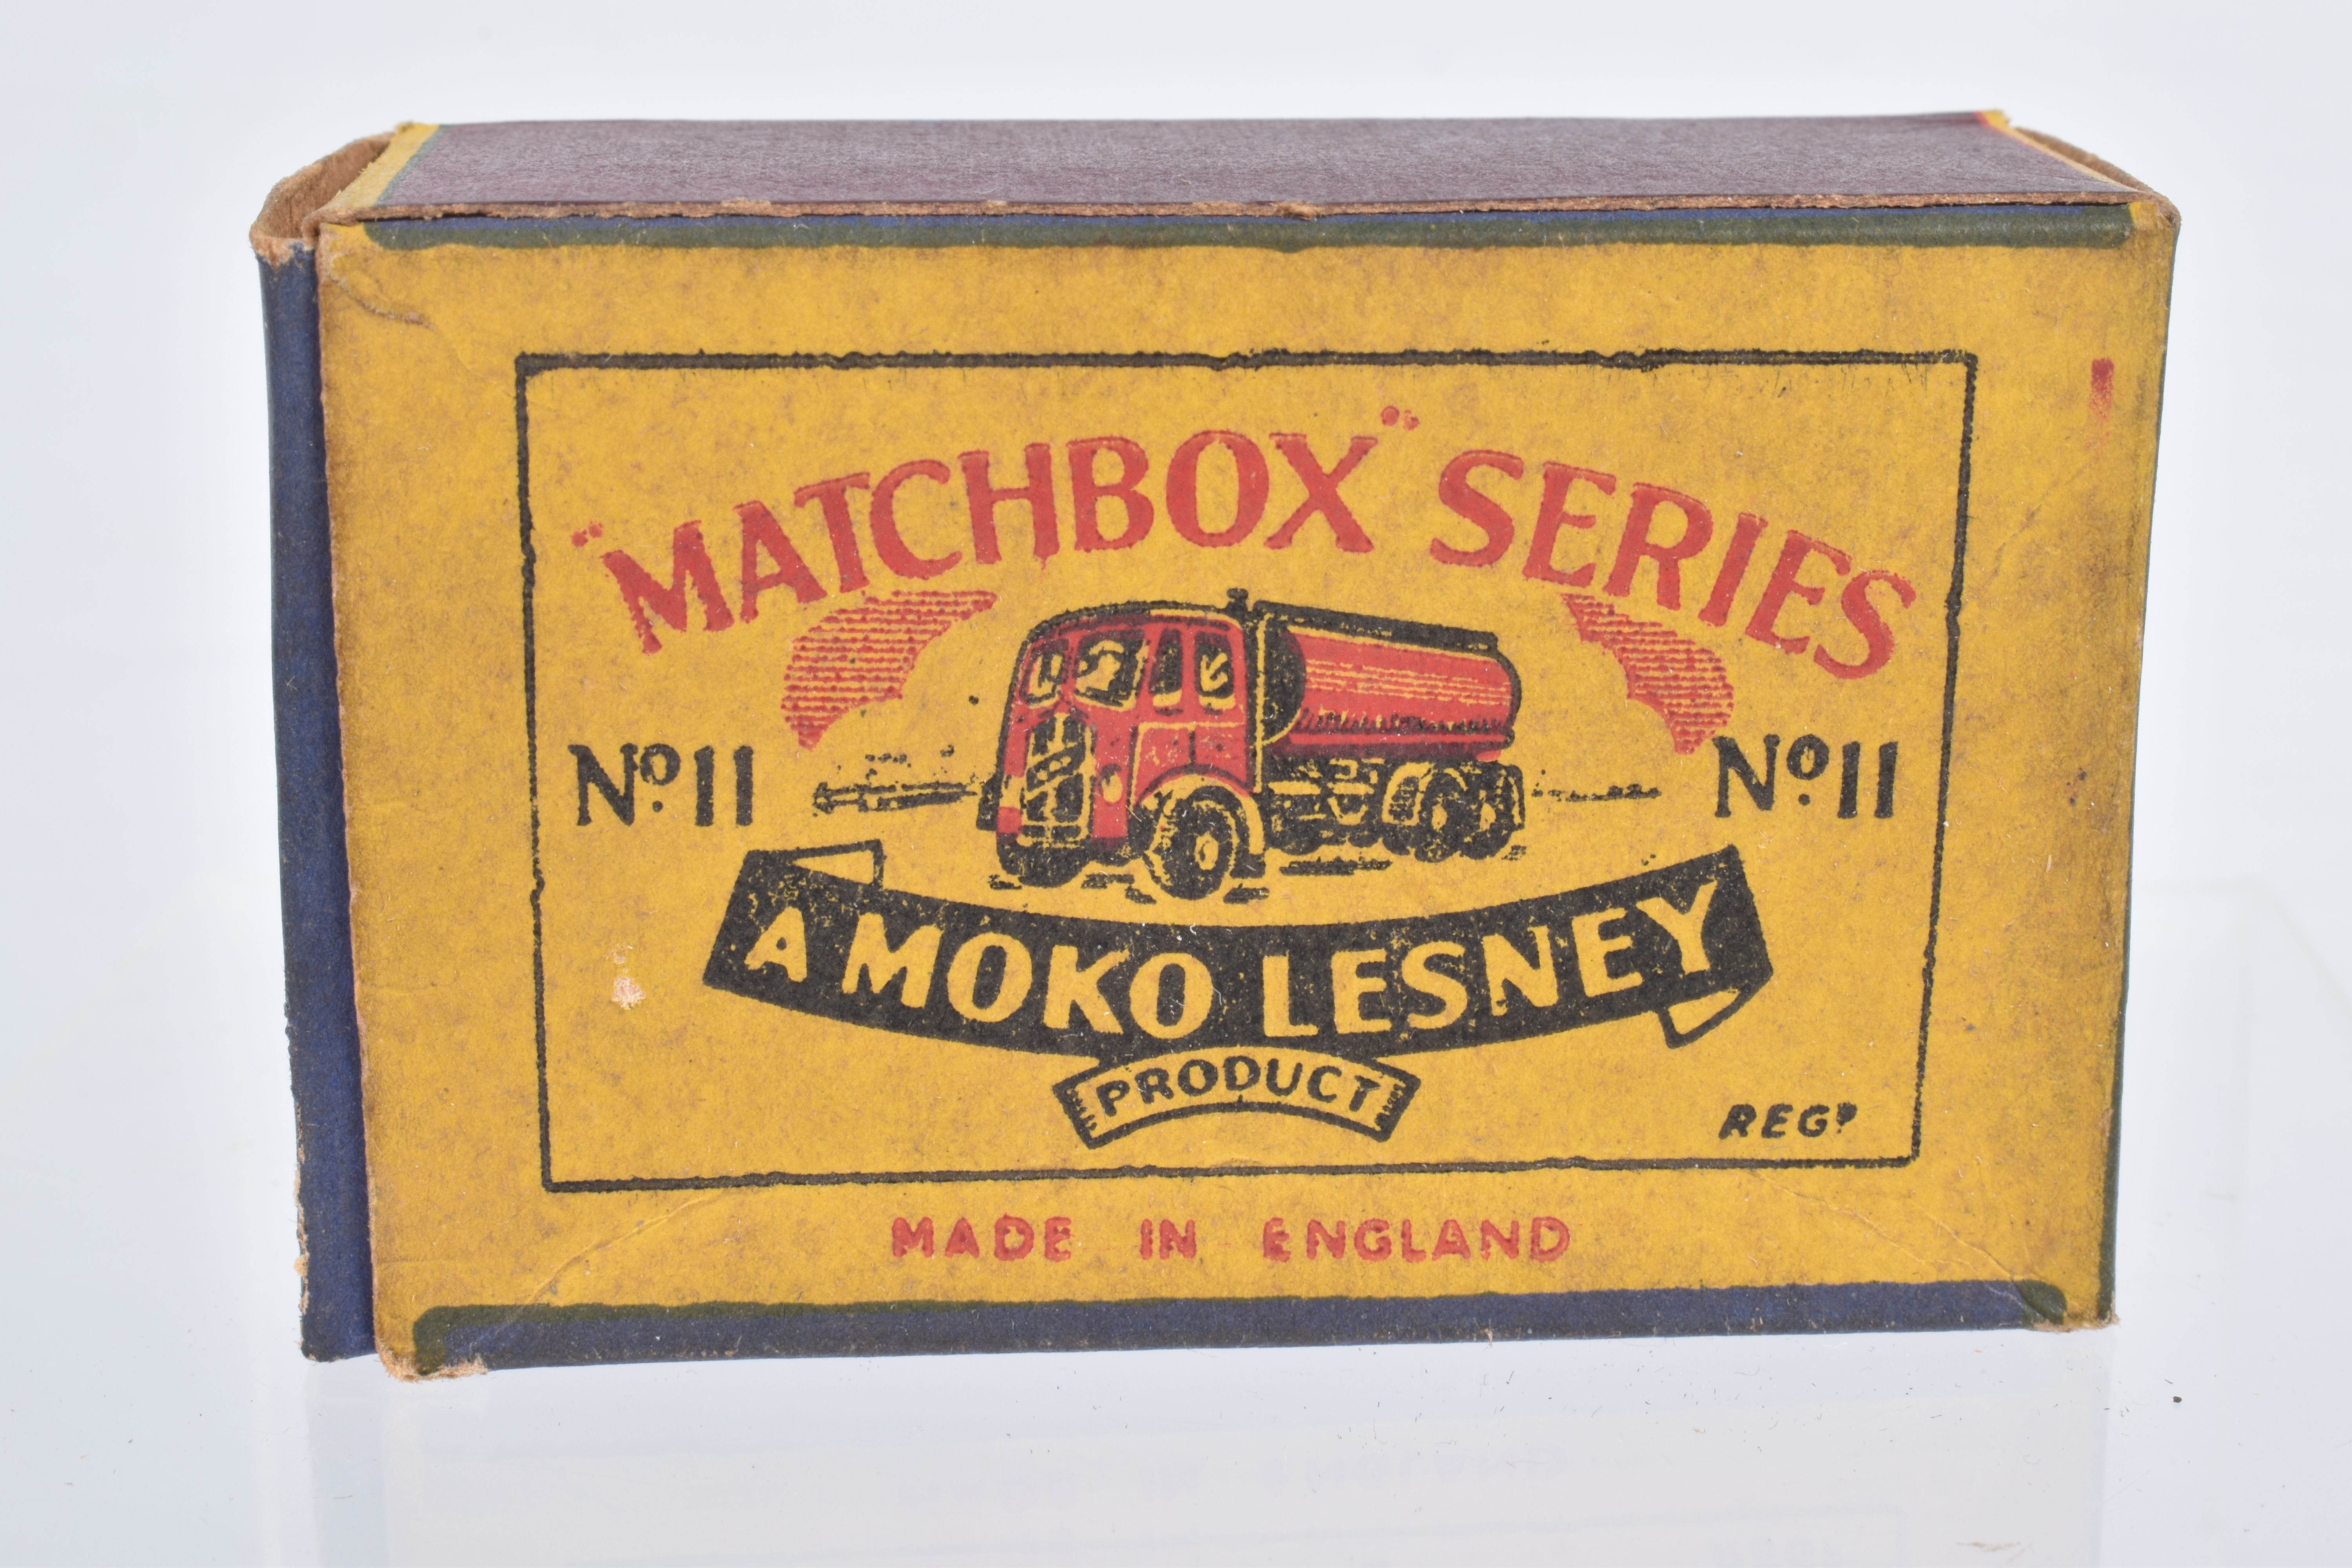 SEVEN BOXED MOKO LESNEY MATCHBOX SERIES LORRY AND TRUCK MODELS, E.R.F. Road Tanker 'Esso', No.11, - Image 16 of 44